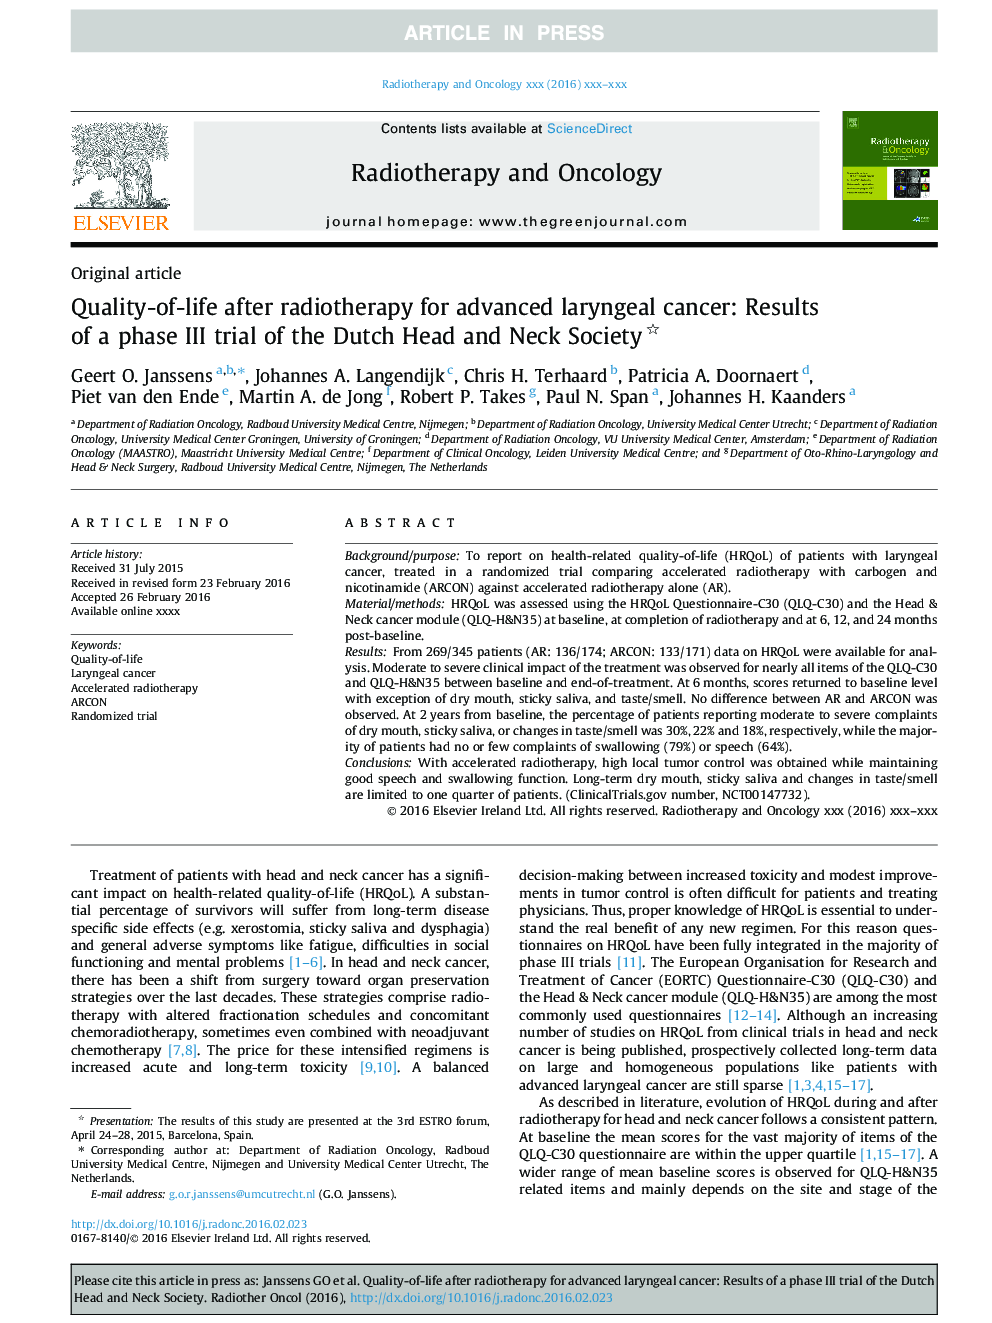 Quality-of-life after radiotherapy for advanced laryngeal cancer: Results of a phase III trial of the Dutch Head and Neck Society